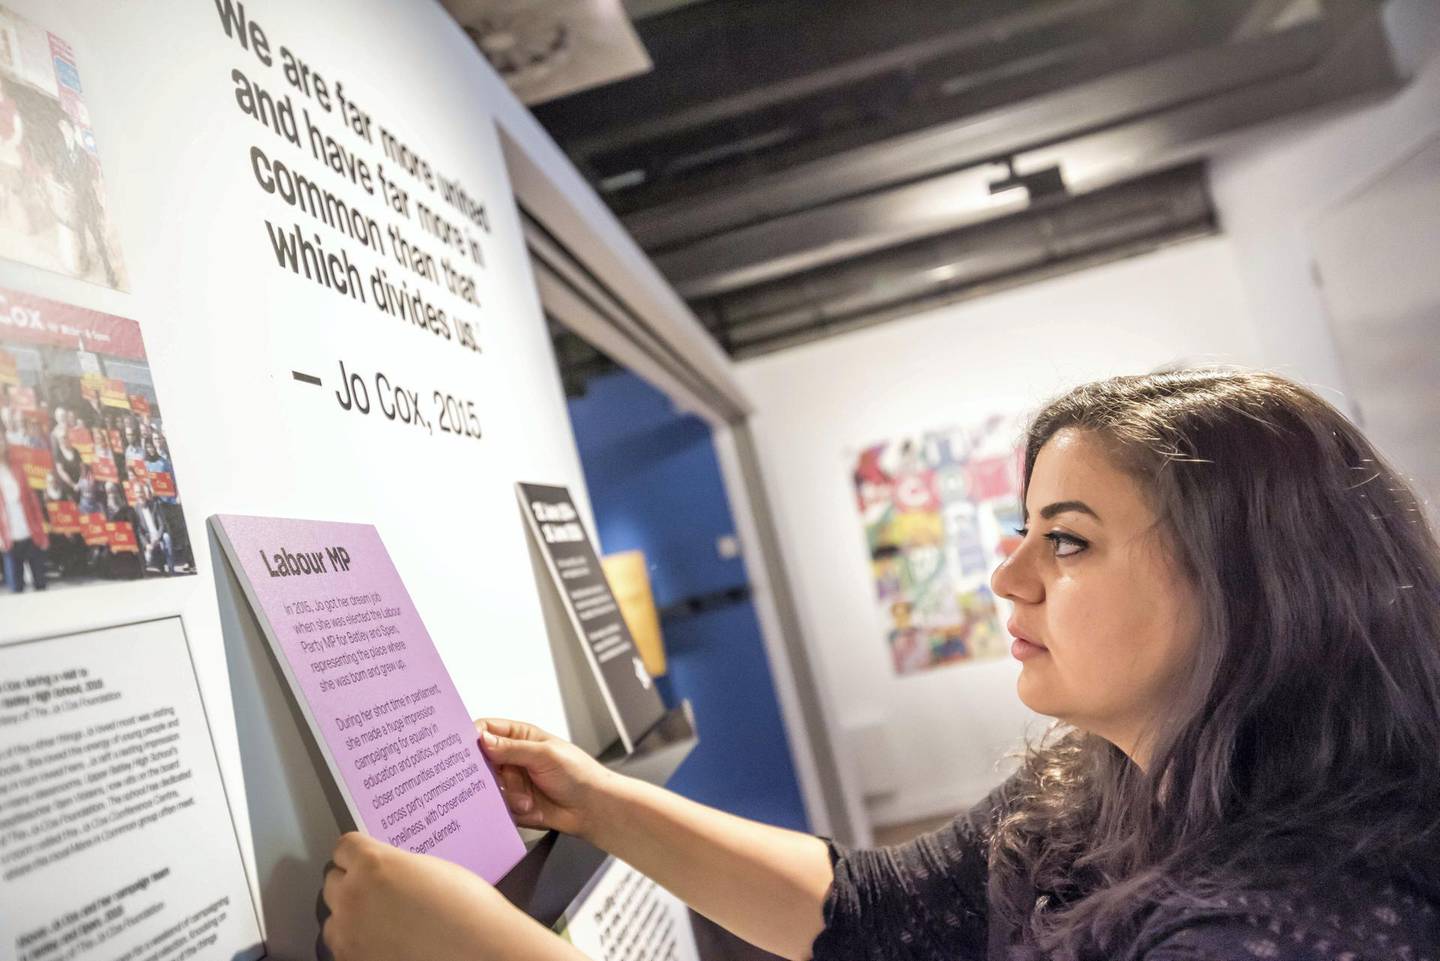 PHM CultureLabs Project Manager Abir Tobji, More in Common - in memory of Jo Cox exhibition at People's History Museum. Photo: People’s History Museum  